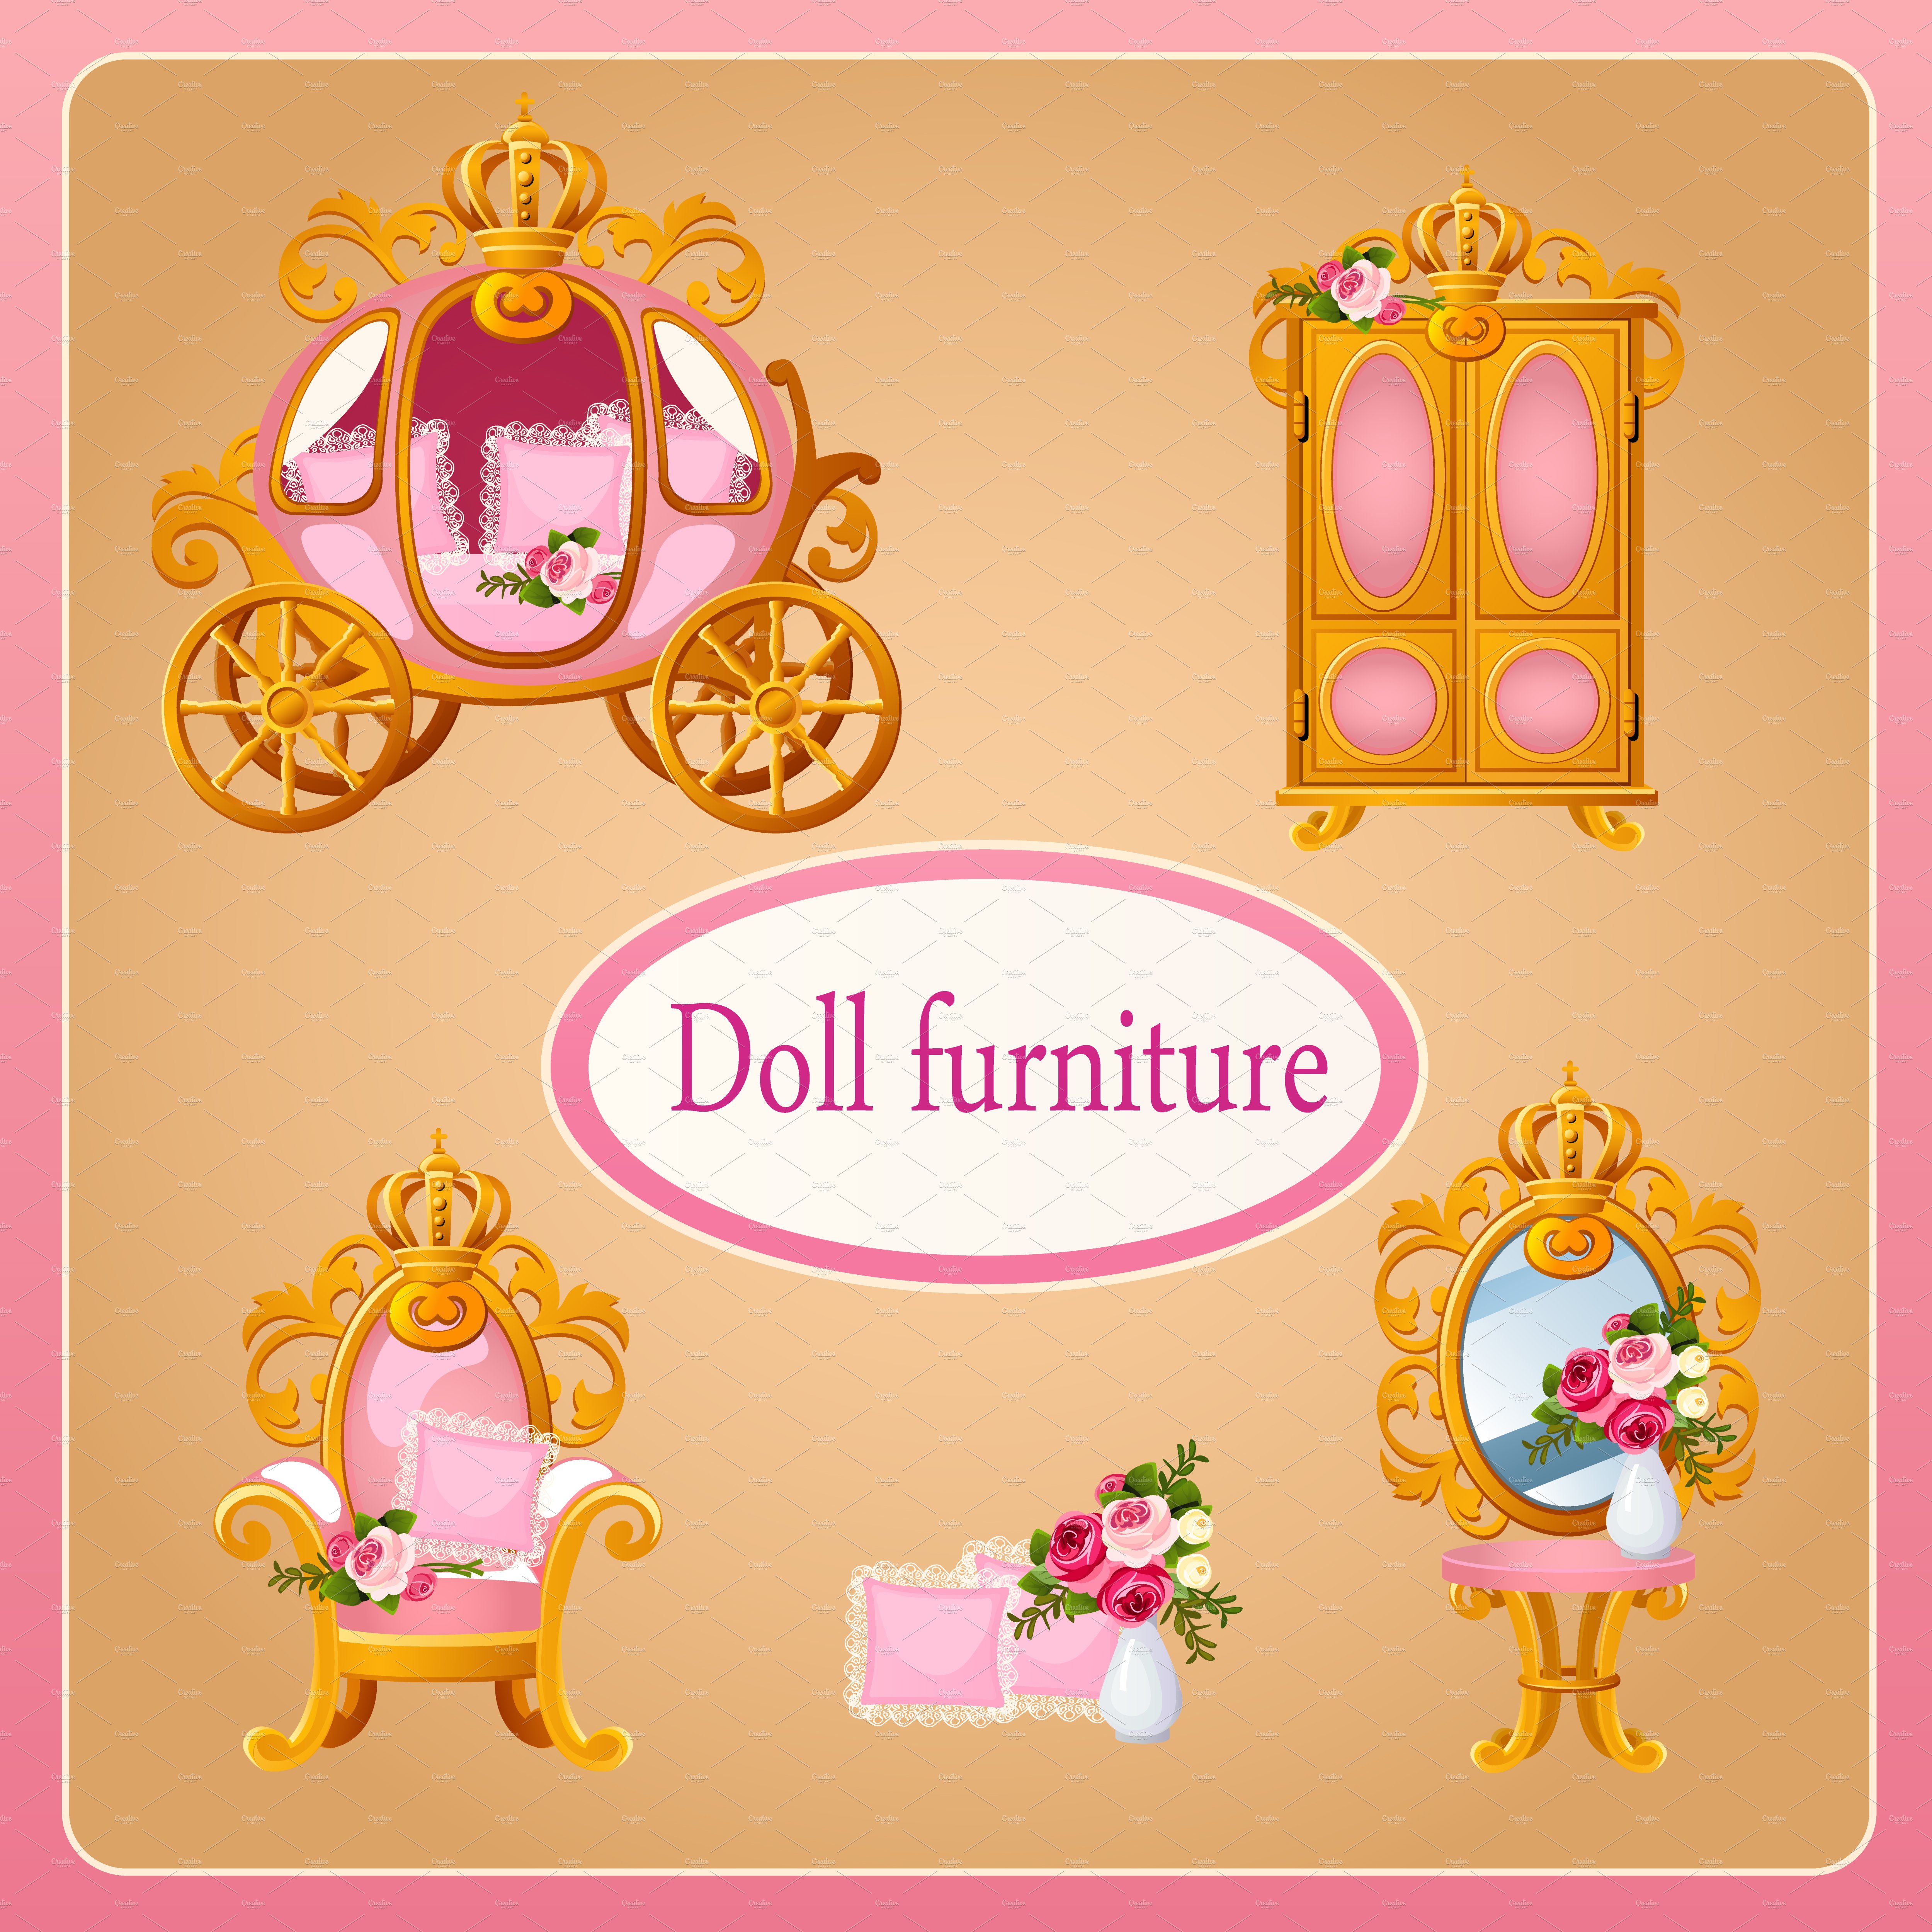 The image of dollhouse furniture preview image.